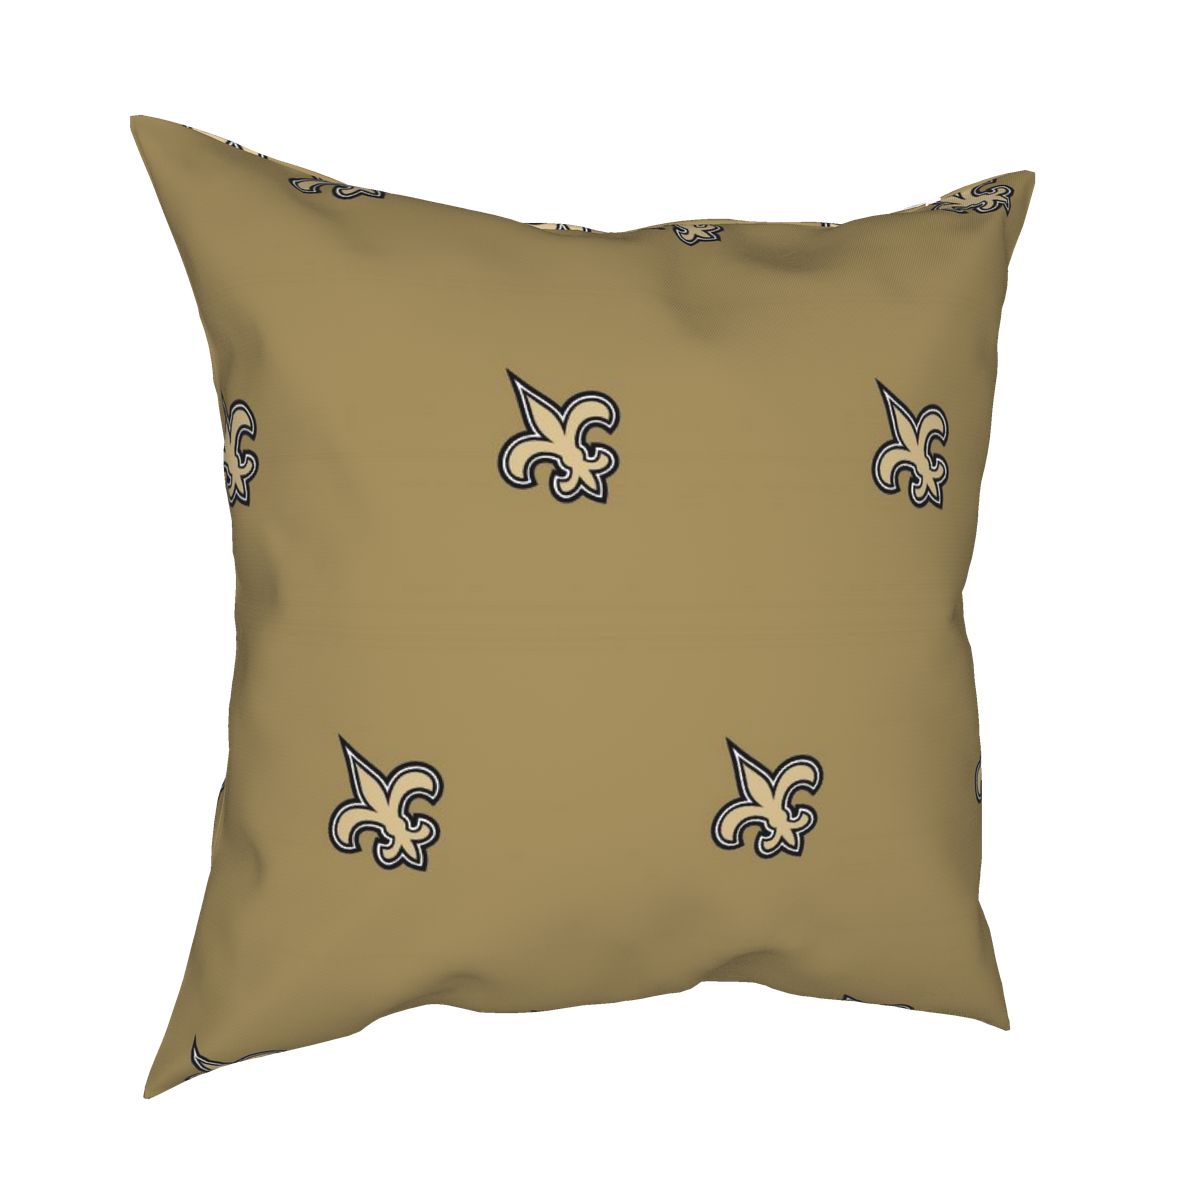 Custom Decorative Football Pillow Case New Orleans Saints Pillowcase Personalized Throw Pillow Covers